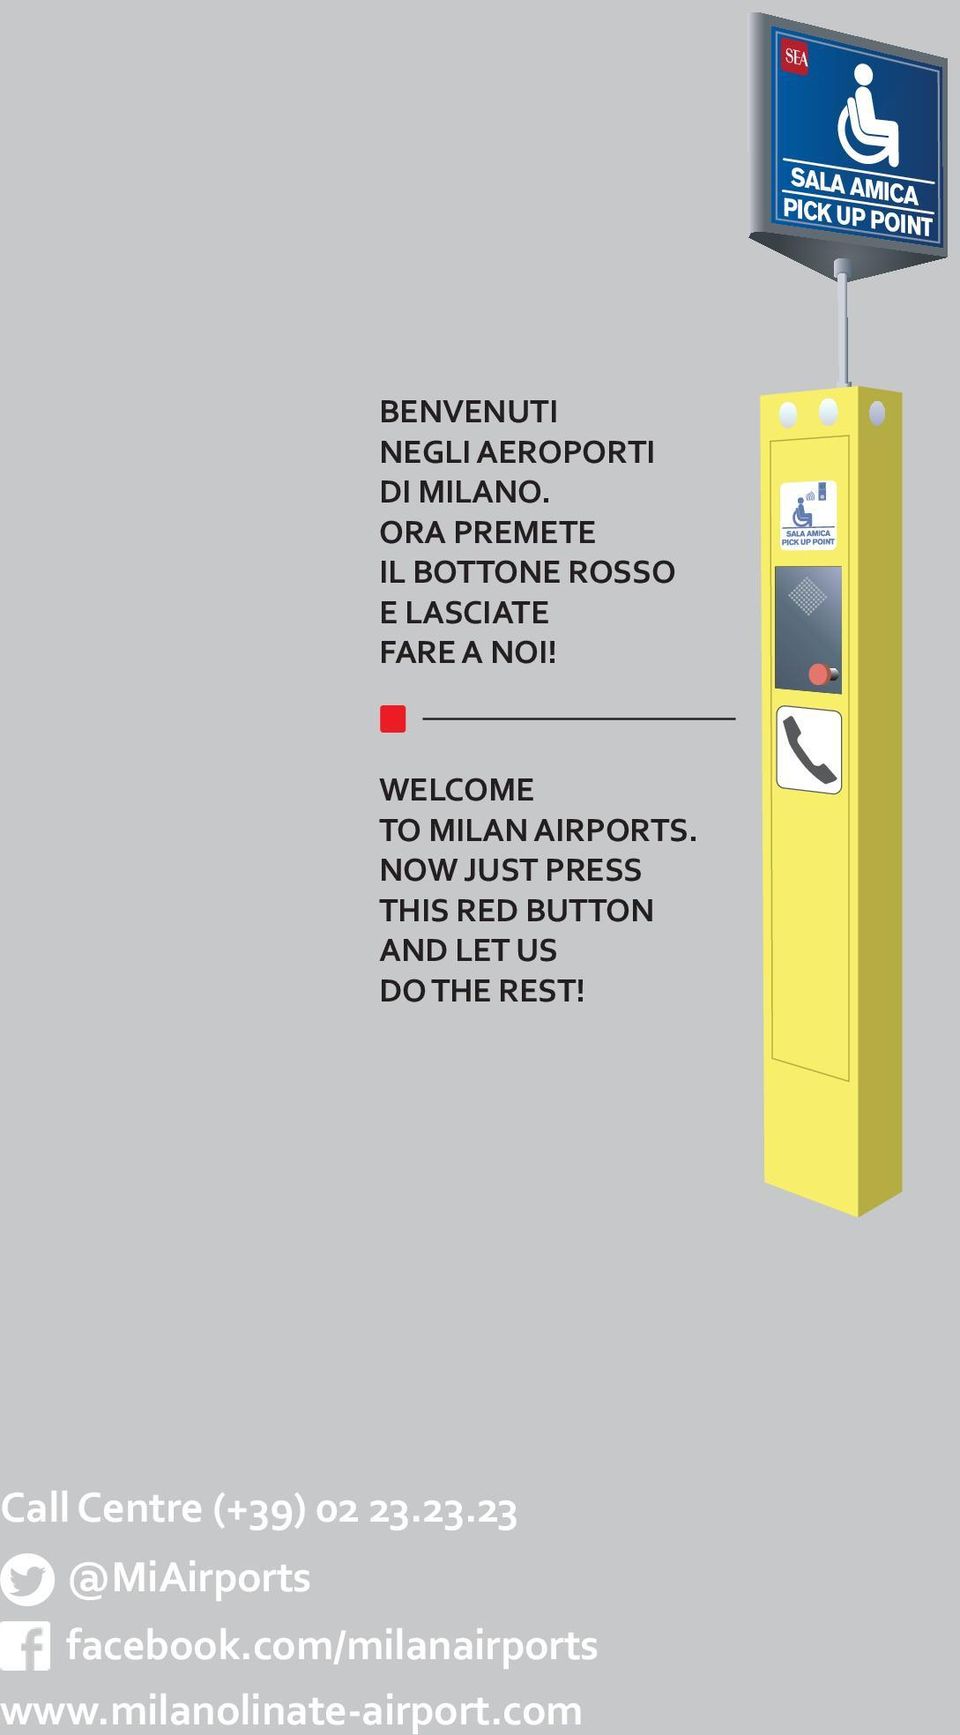 WELCOME TO MILAN AIRPORTS.